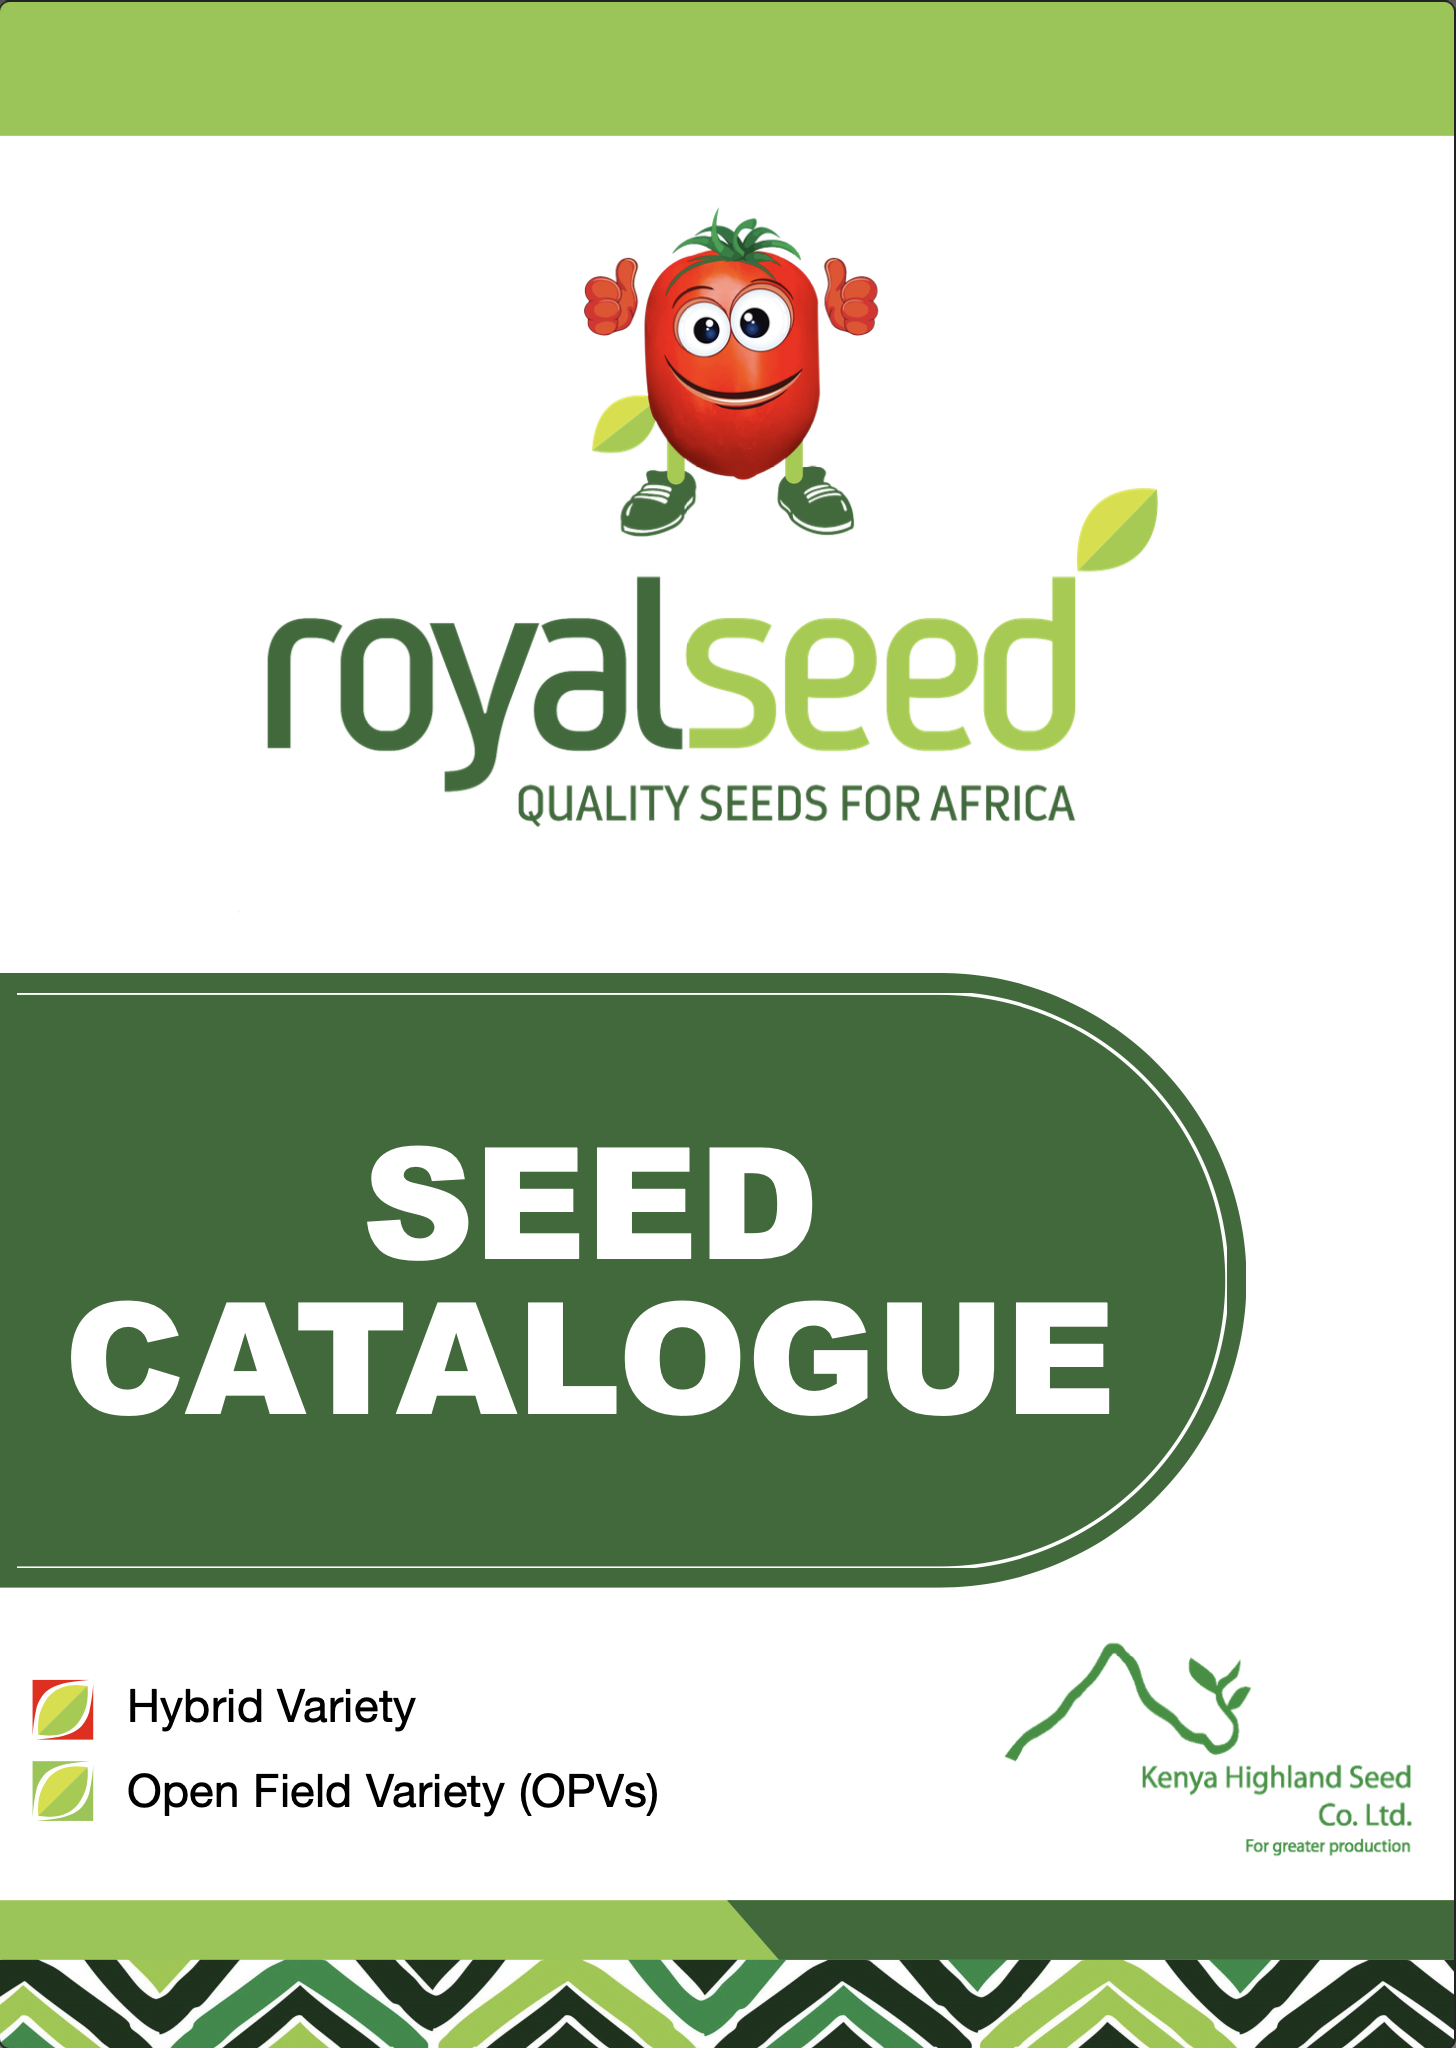 Royal Seed Catalogue front cover 